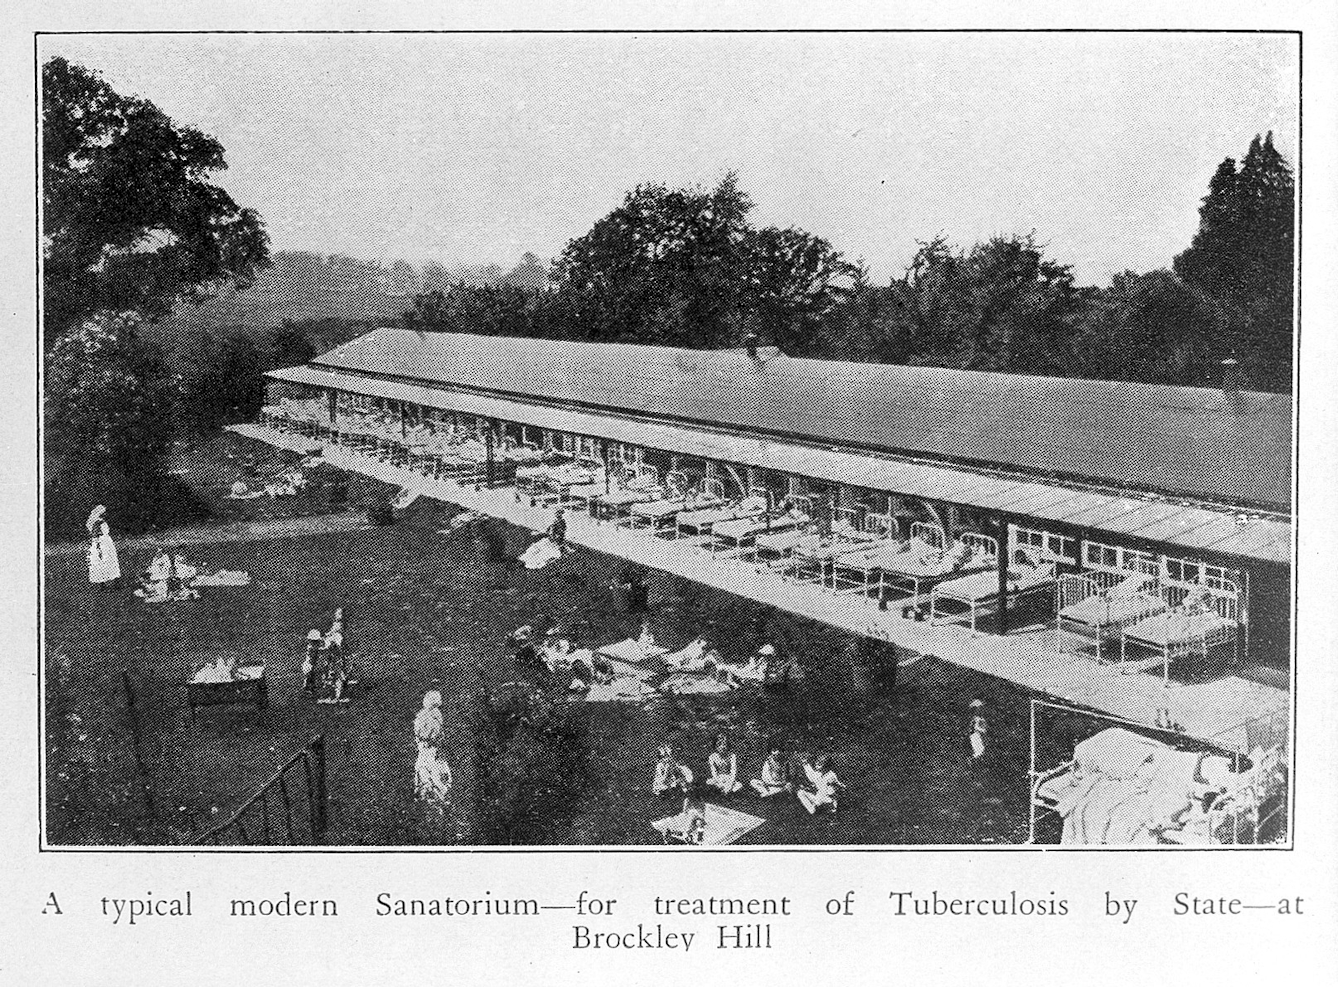 Black and white photograph showing a single storey building with a a row of beds outside it, and patients and nurses on the lawn.